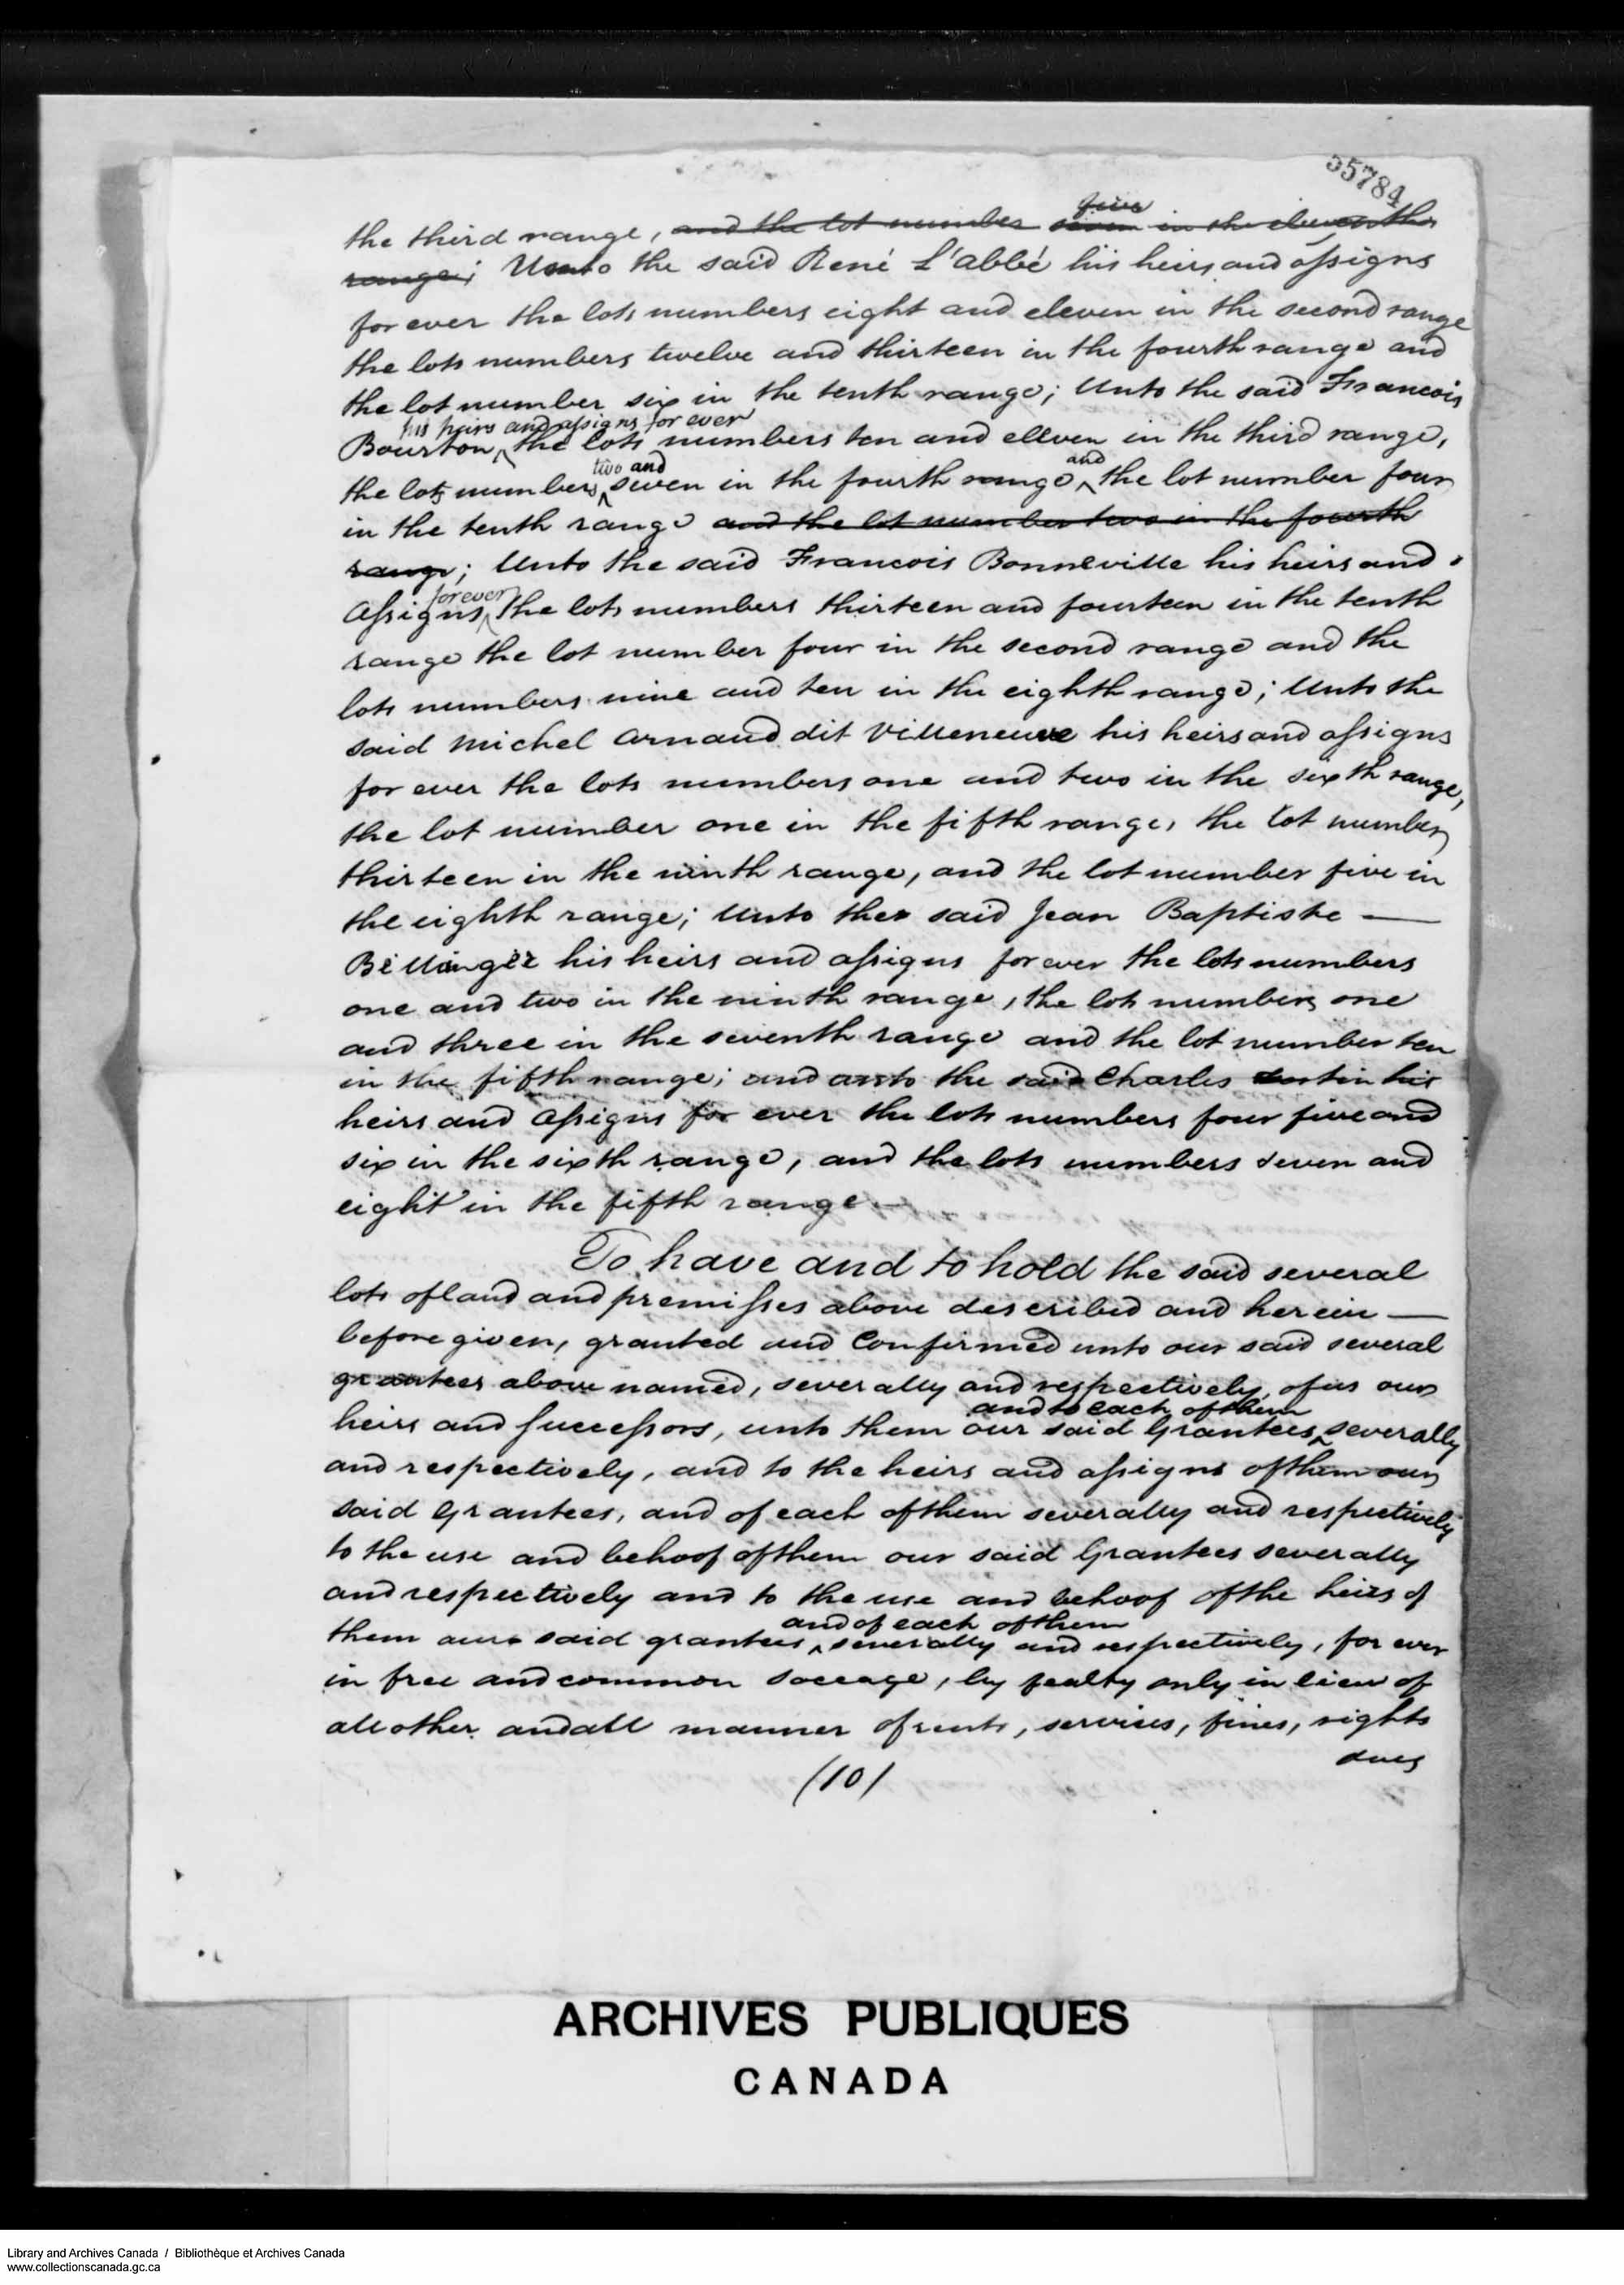 Digitized page of  for Image No.: e008700272